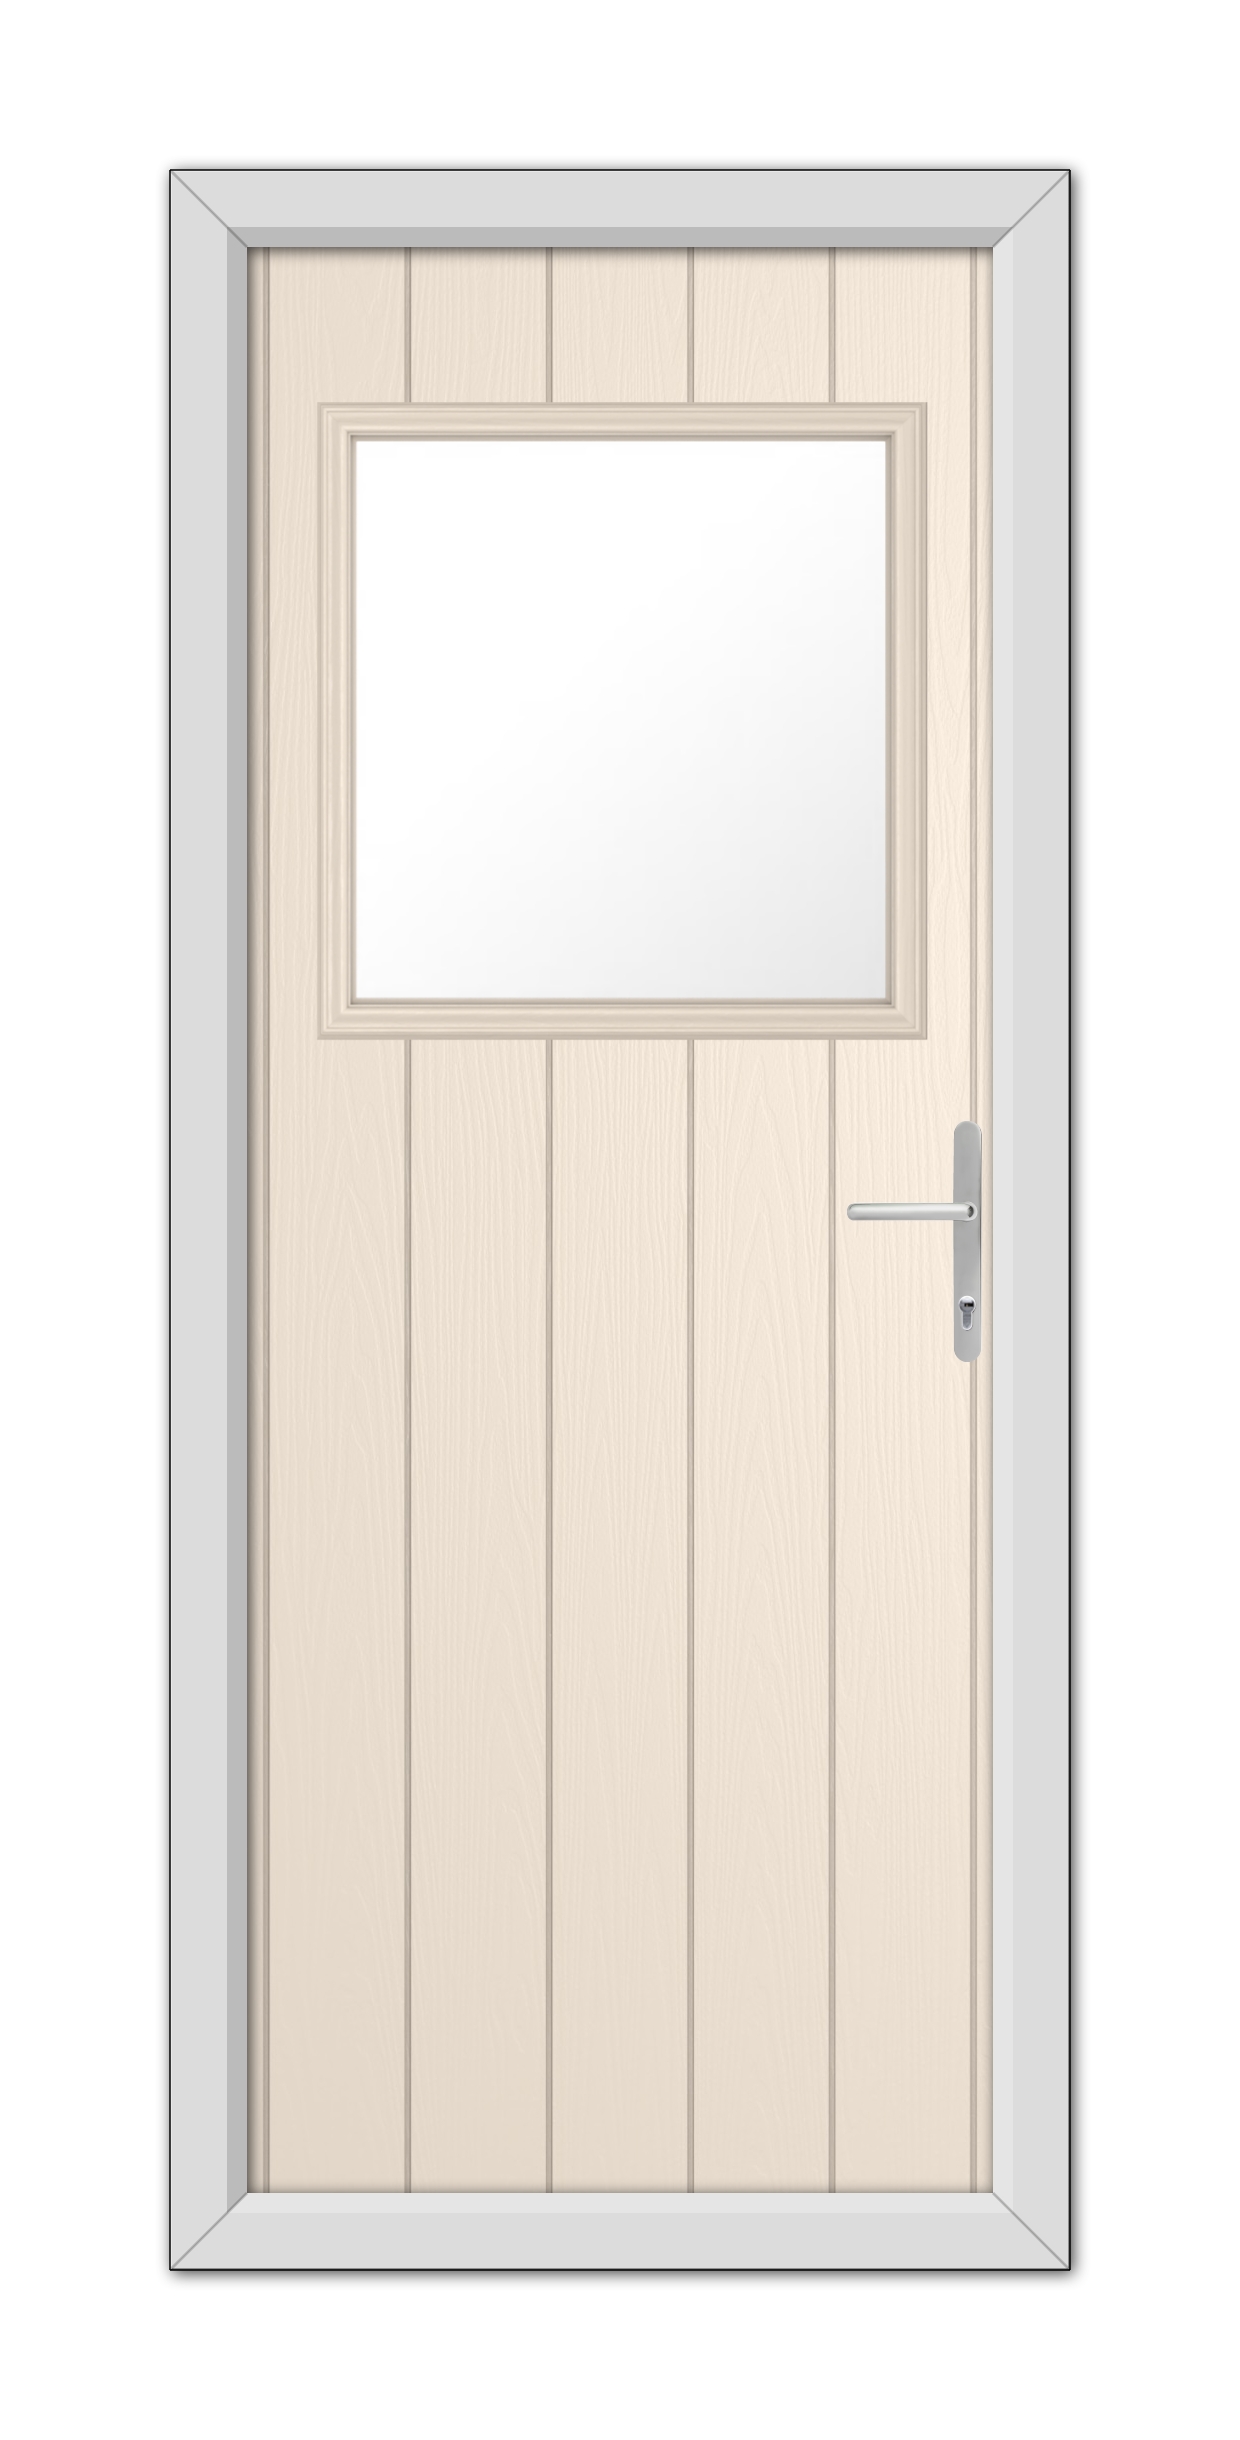 A Cream Fife Composite Door 48mm Timber Core with a small rectangular window at the top, featuring a metal handle on the right side, set within a gray frame.